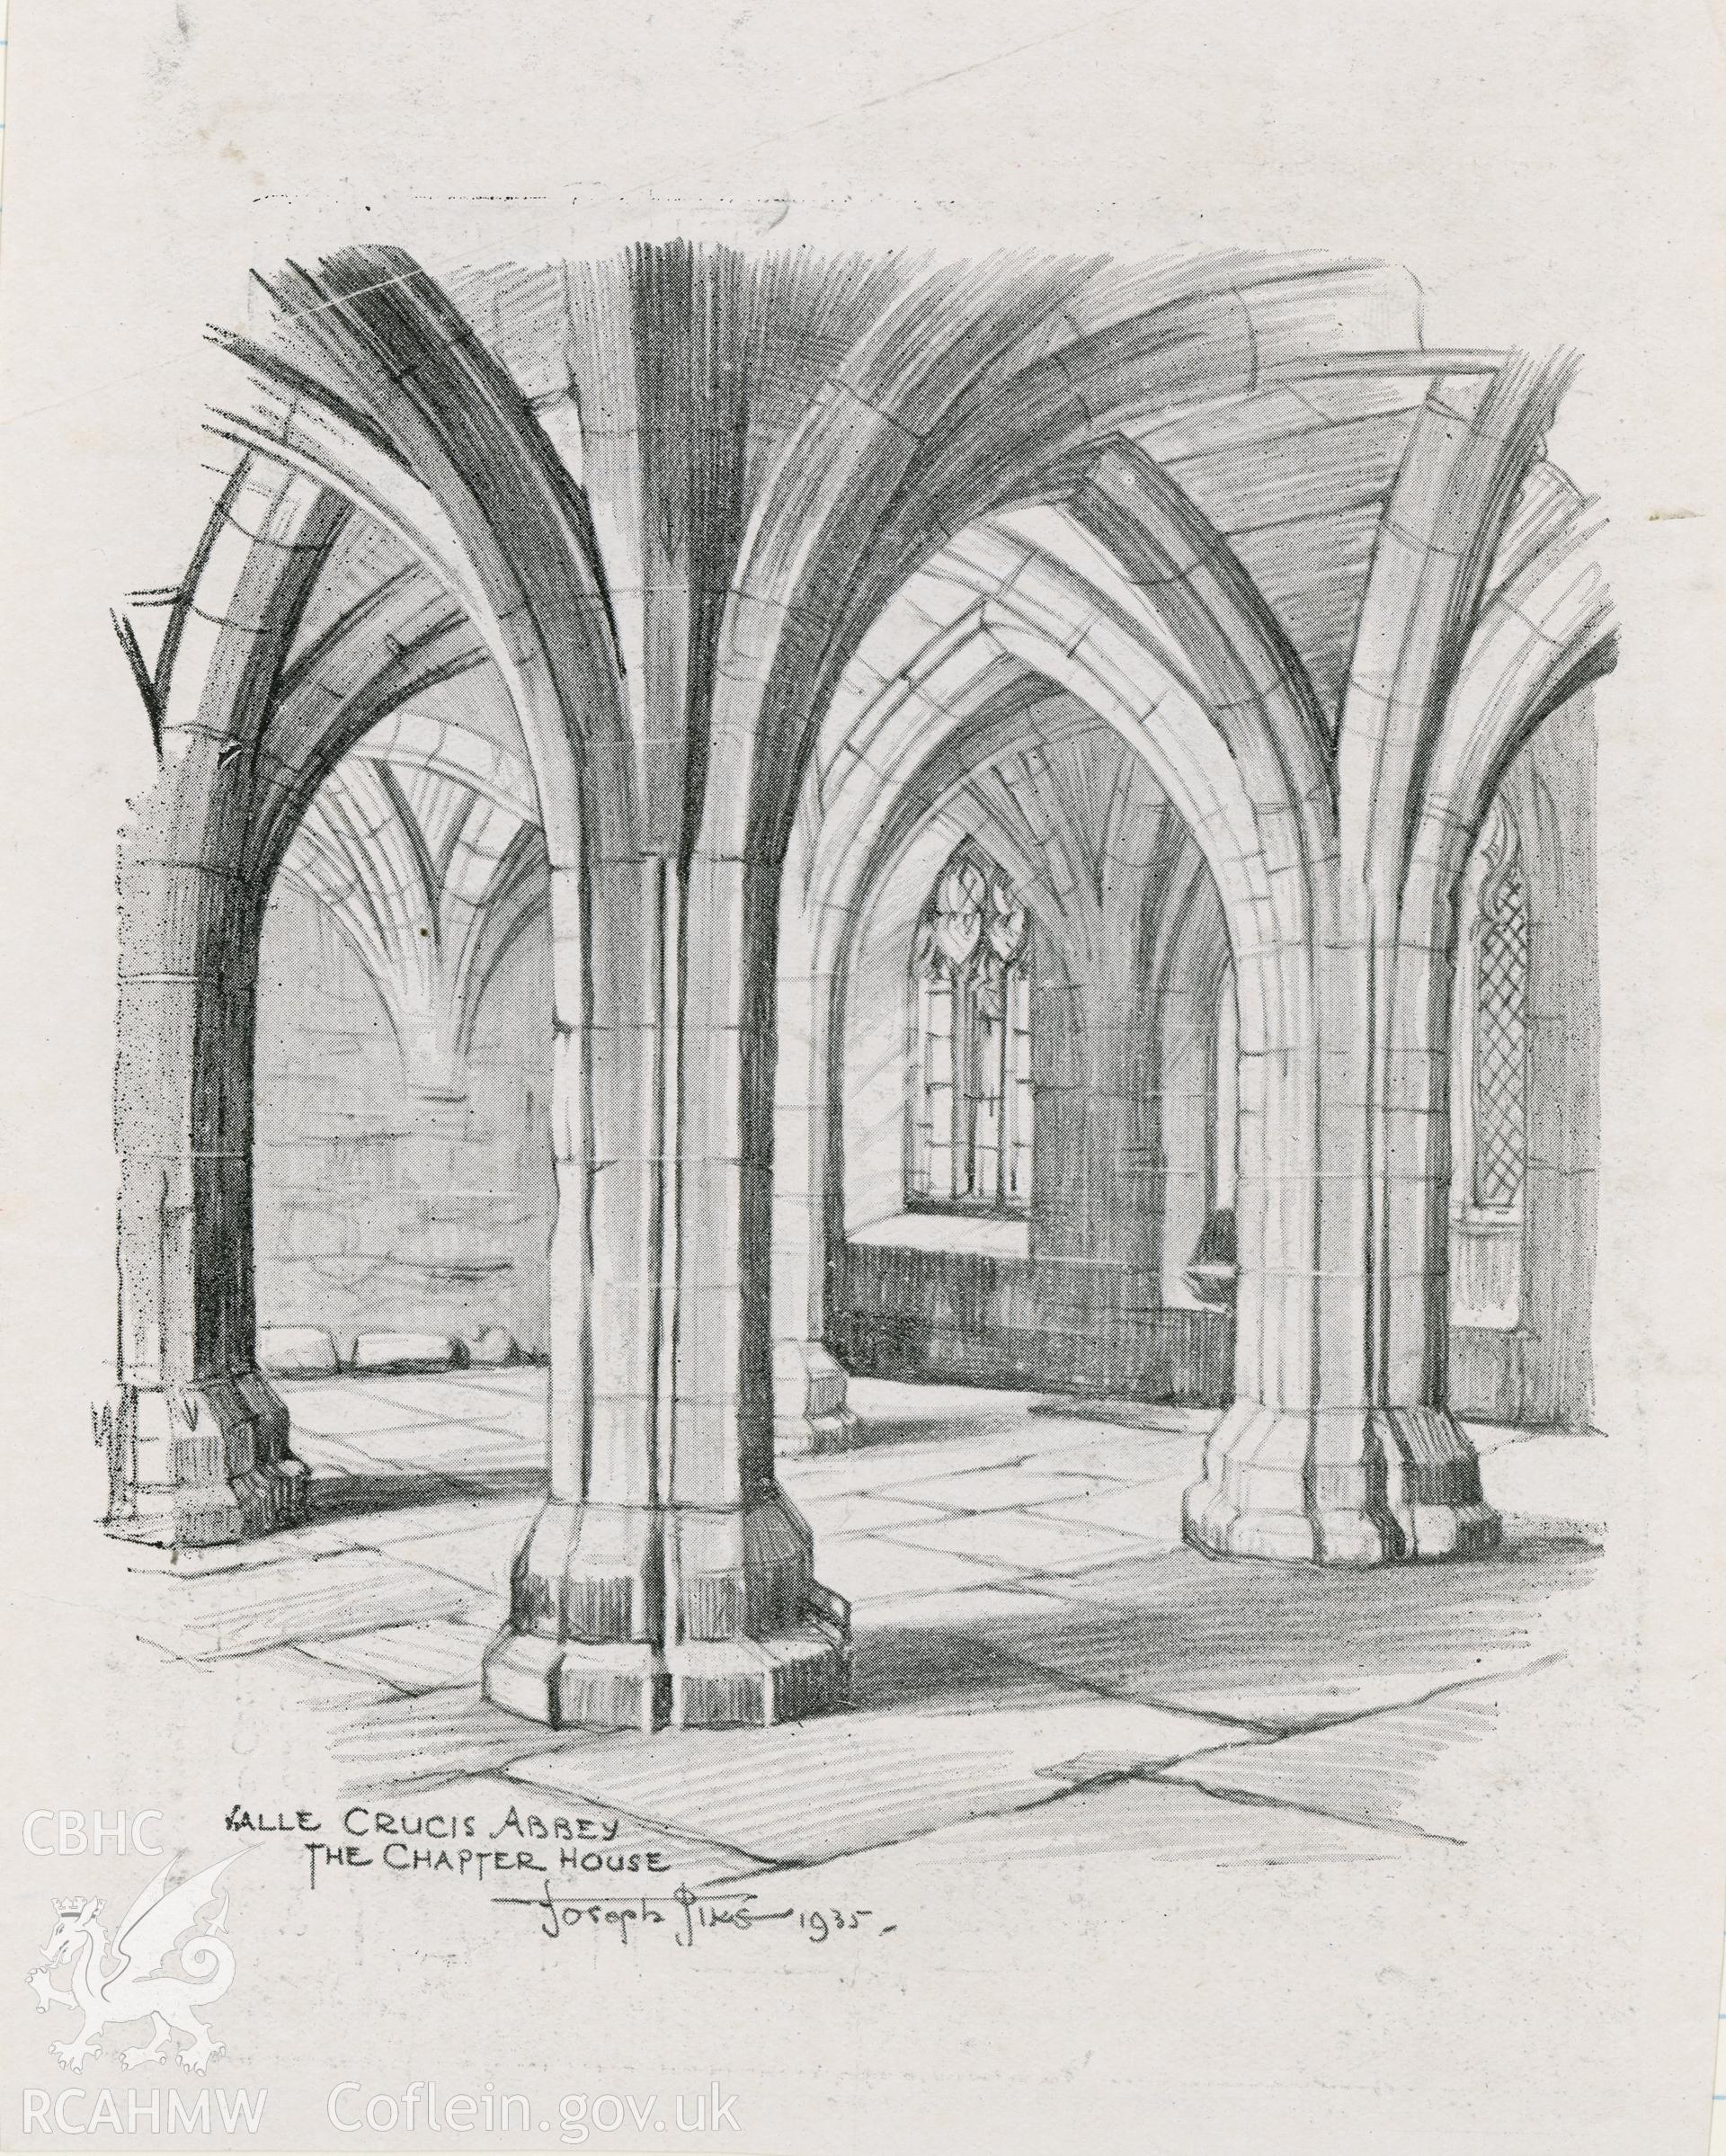 Sketch showing detail of arches at Valle Crucis Abbey.